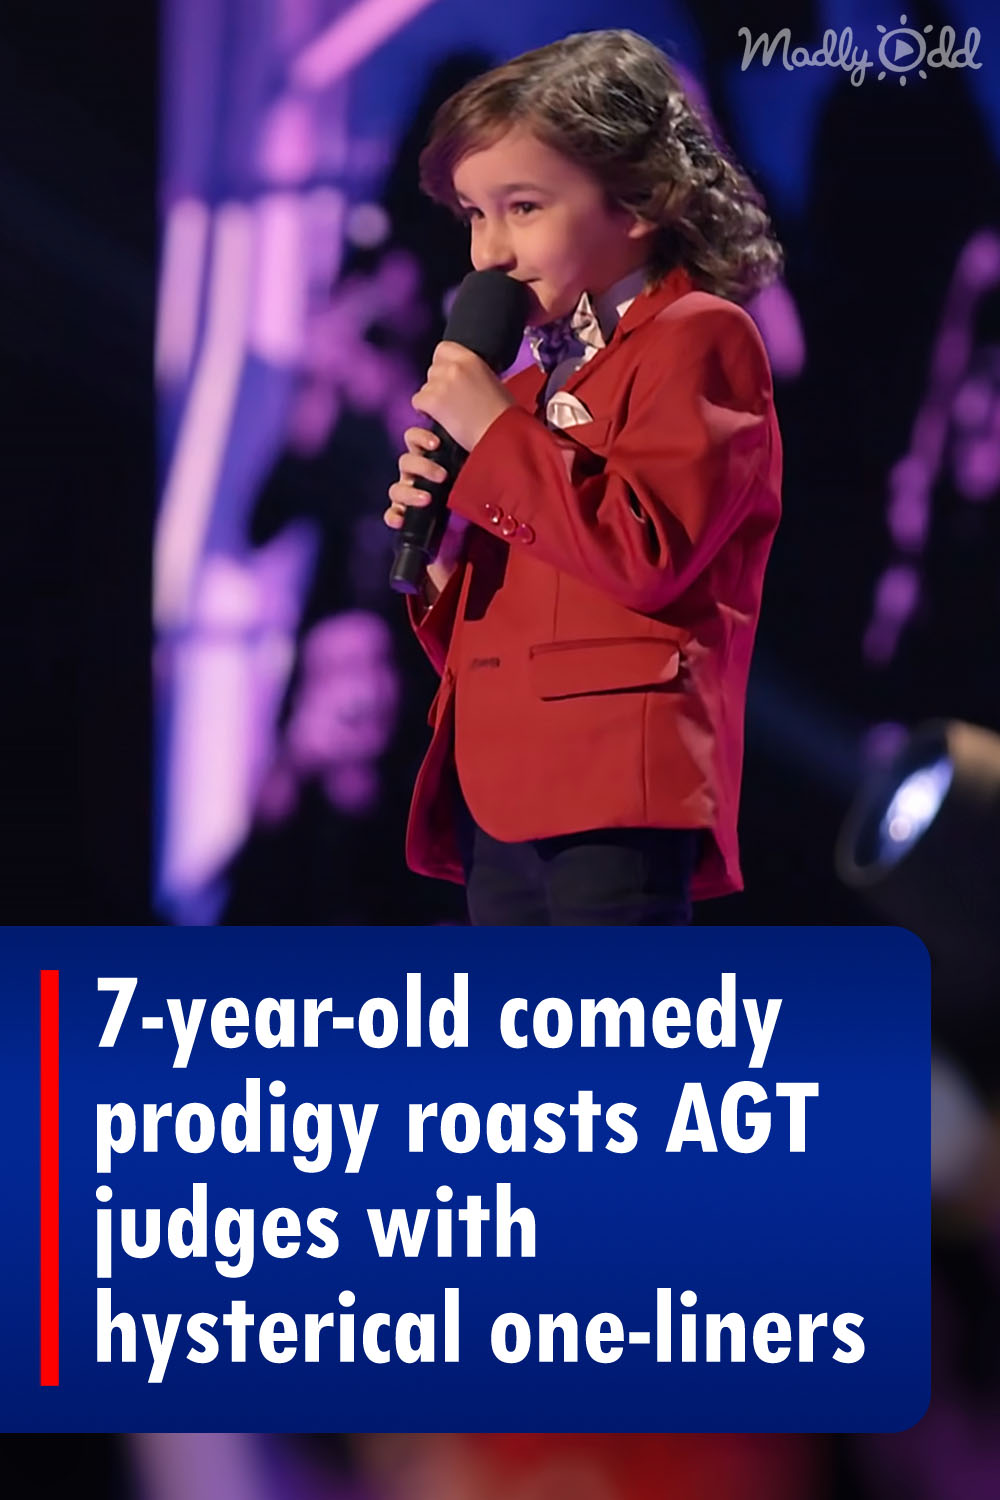 7-year-old comedy prodigy roasts AGT judges with hysterical one-liners